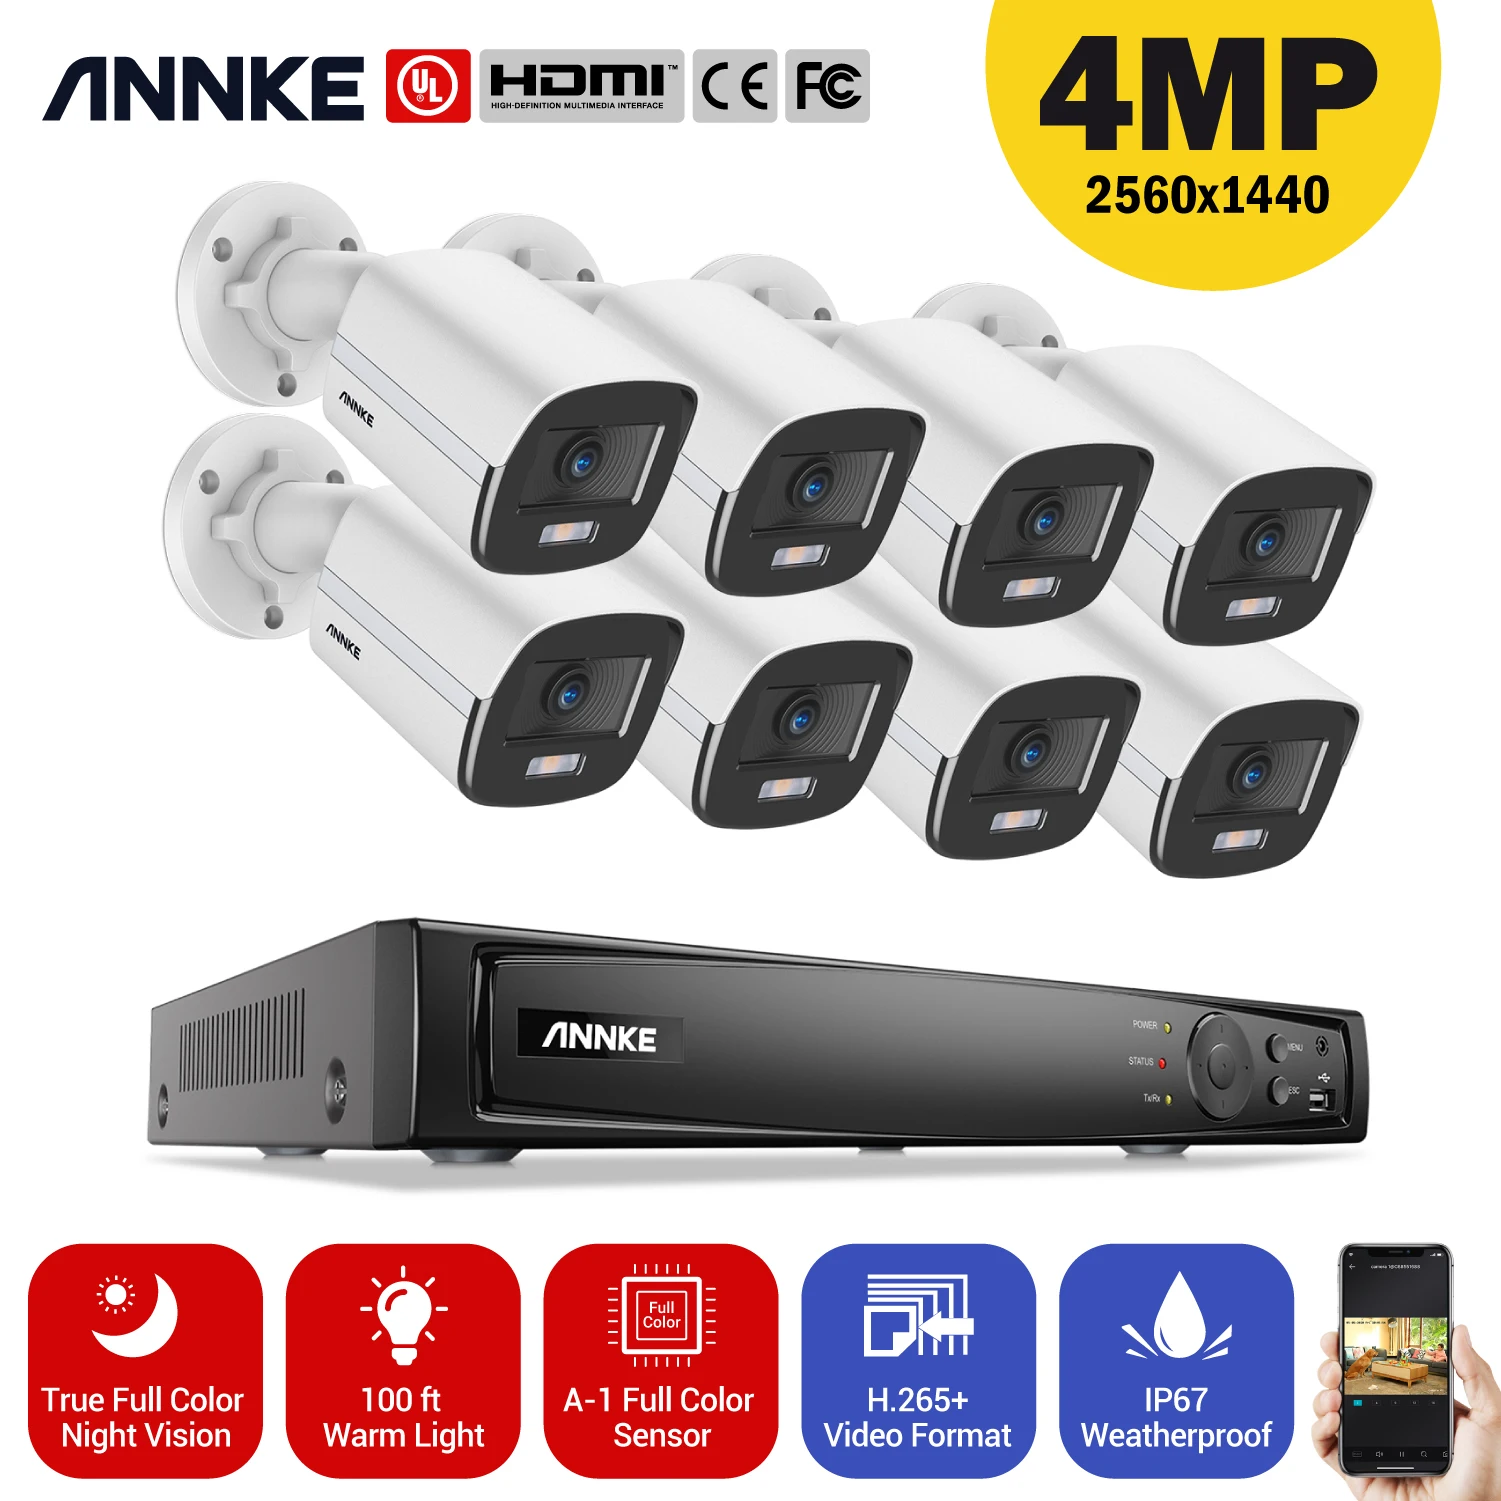 

ANNKE 4MP FHD POE Network Video Security System 8MP POE Recorder With 4MP Full Color Night Vision Surveillance CCTV POE Cameras